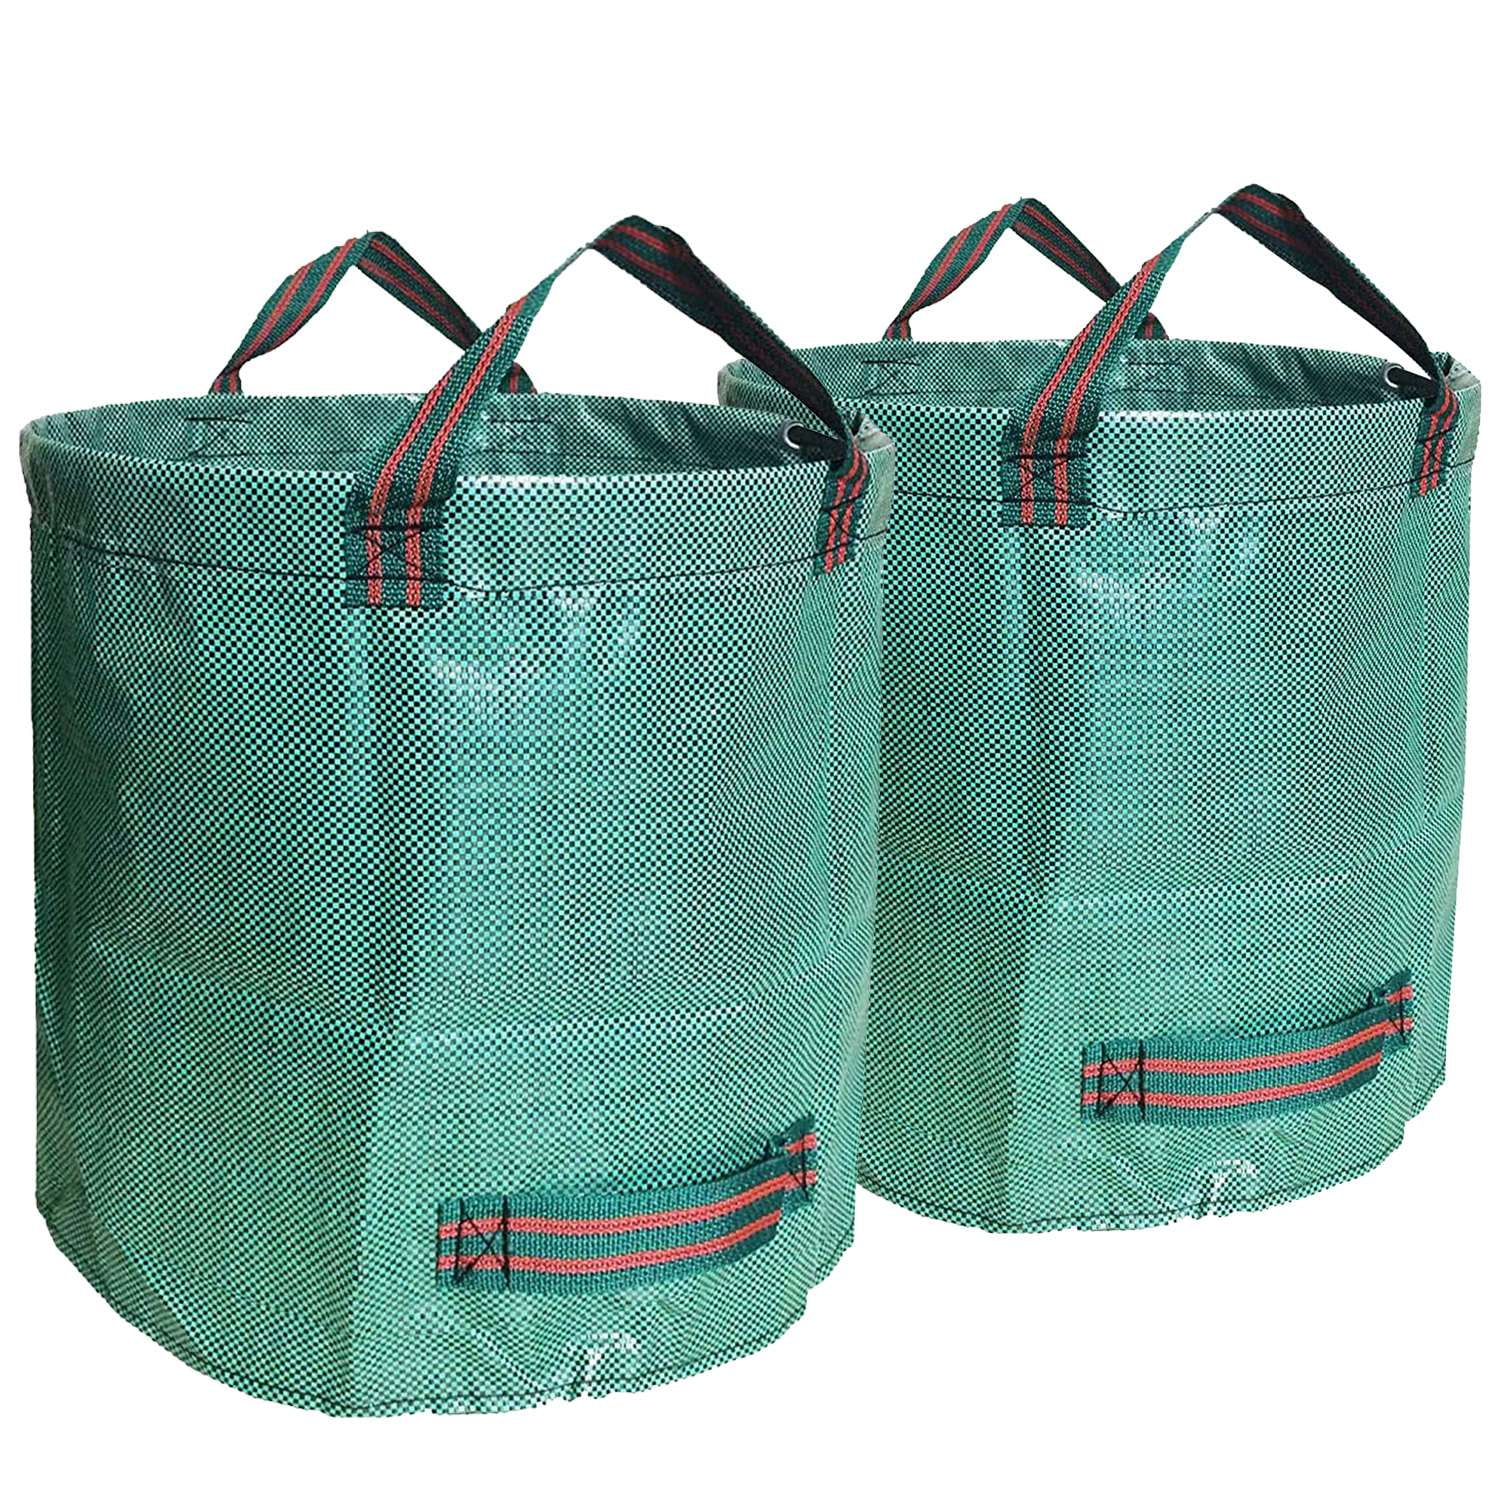 2Pcs 132 Gallons Garden Bag Lawn and Leaf Bags Reusable Yard with Dual Handles 